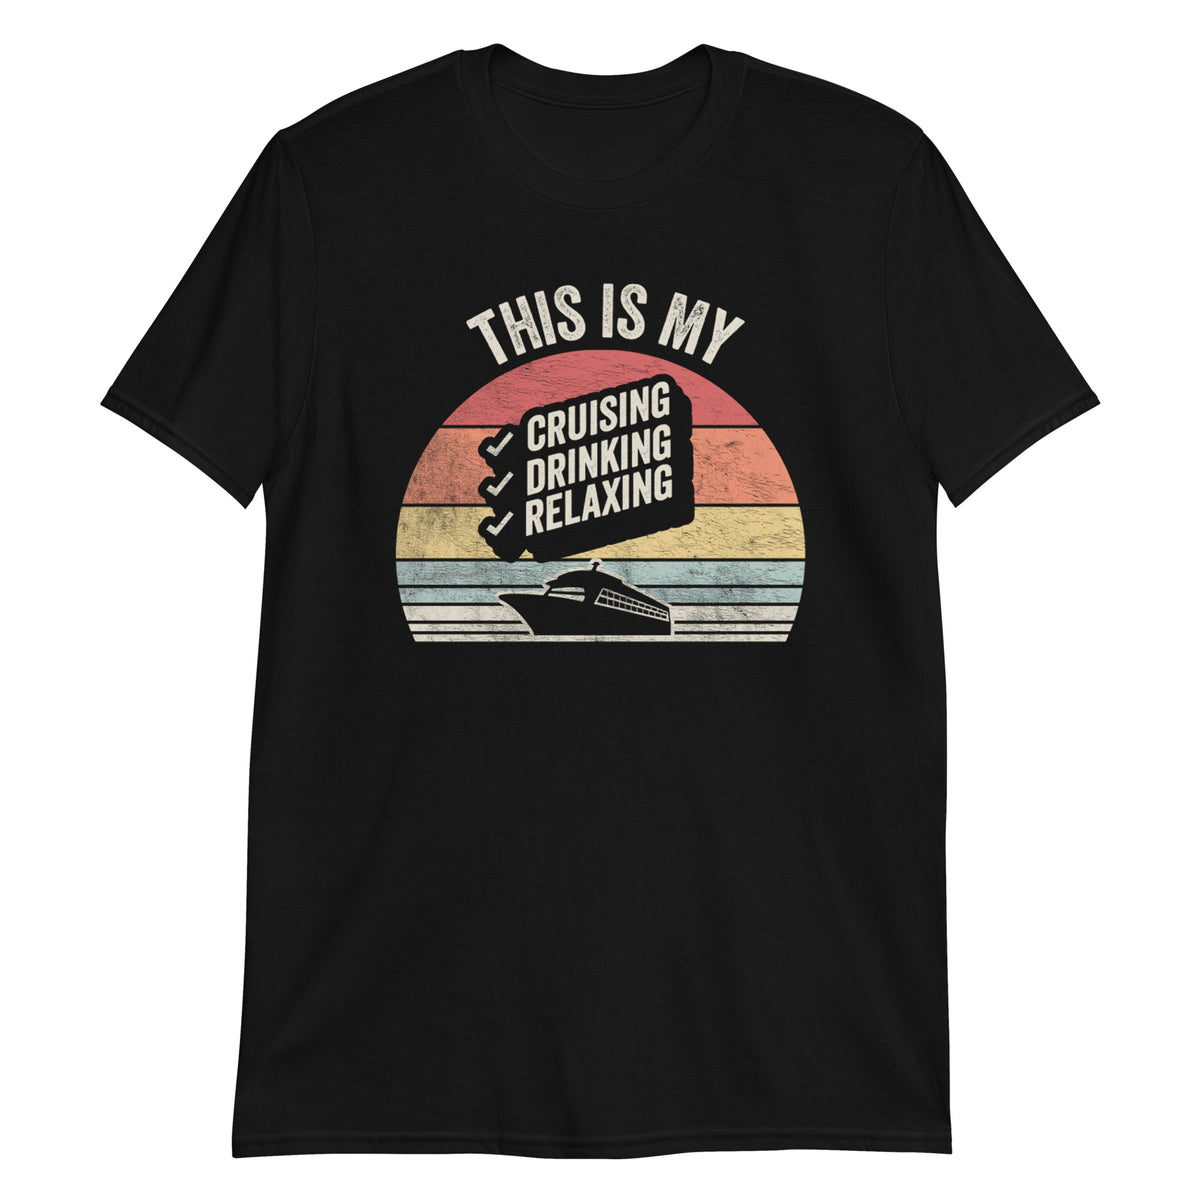 This is My Cruisind, Drinking, Relaxing T-Shirt